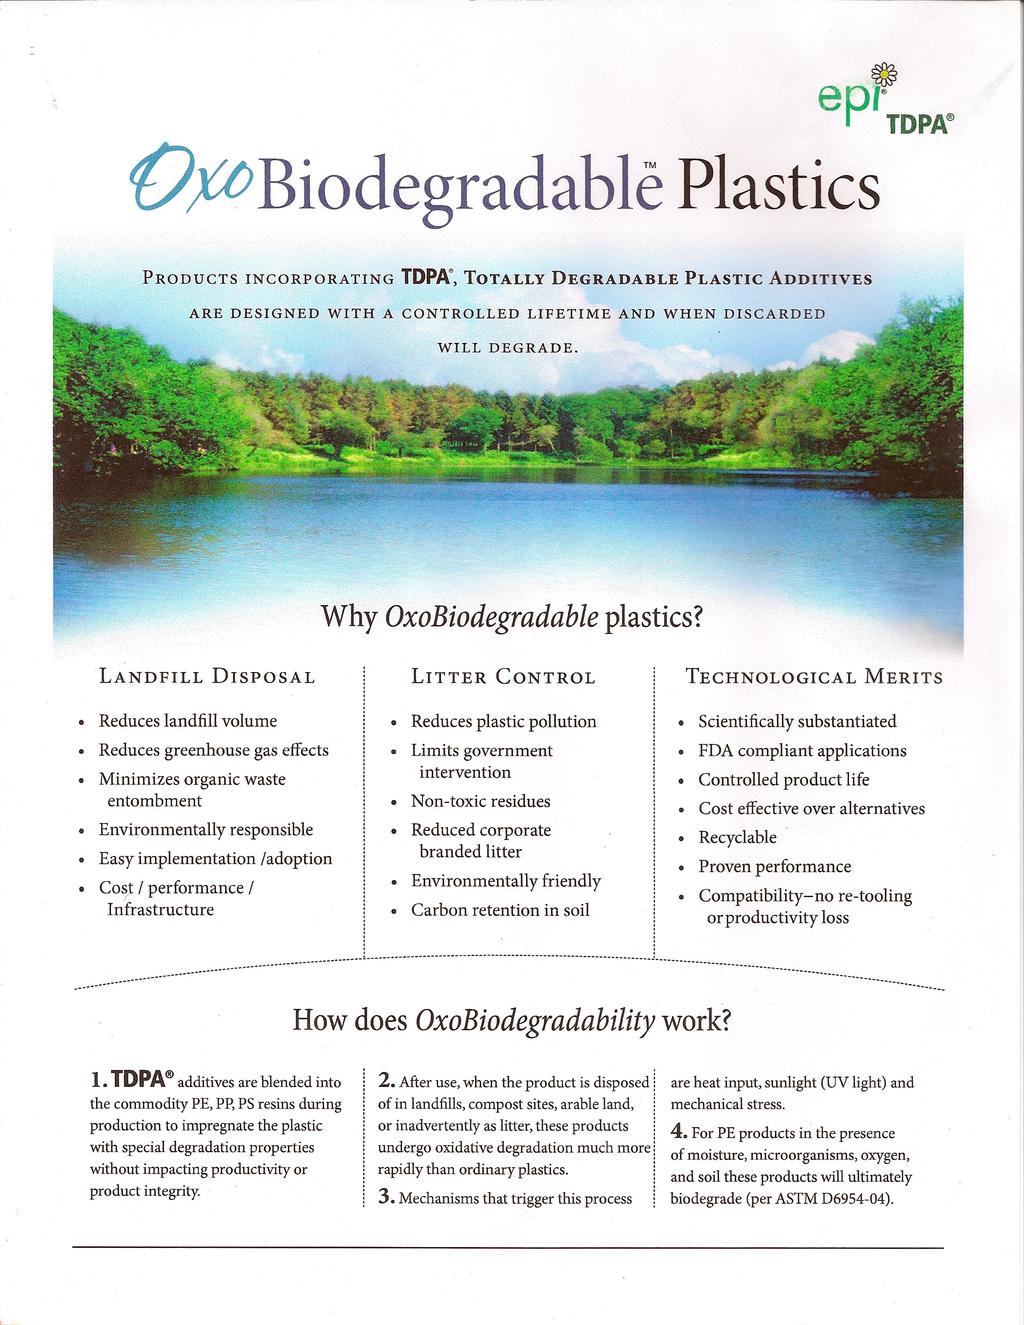 @ ep'@tdpa Oµ;Biodegradable Plastics PRODUCTS INCORPORATING ARE DESIGNED WITH TDPA~,TOTALLY A CONTROLLED WILL DEGRADABLE LIFETIME PLASTIC AND WHEN ADDITIVES DISCARDED DEGRADE Why OxoBiodegradable